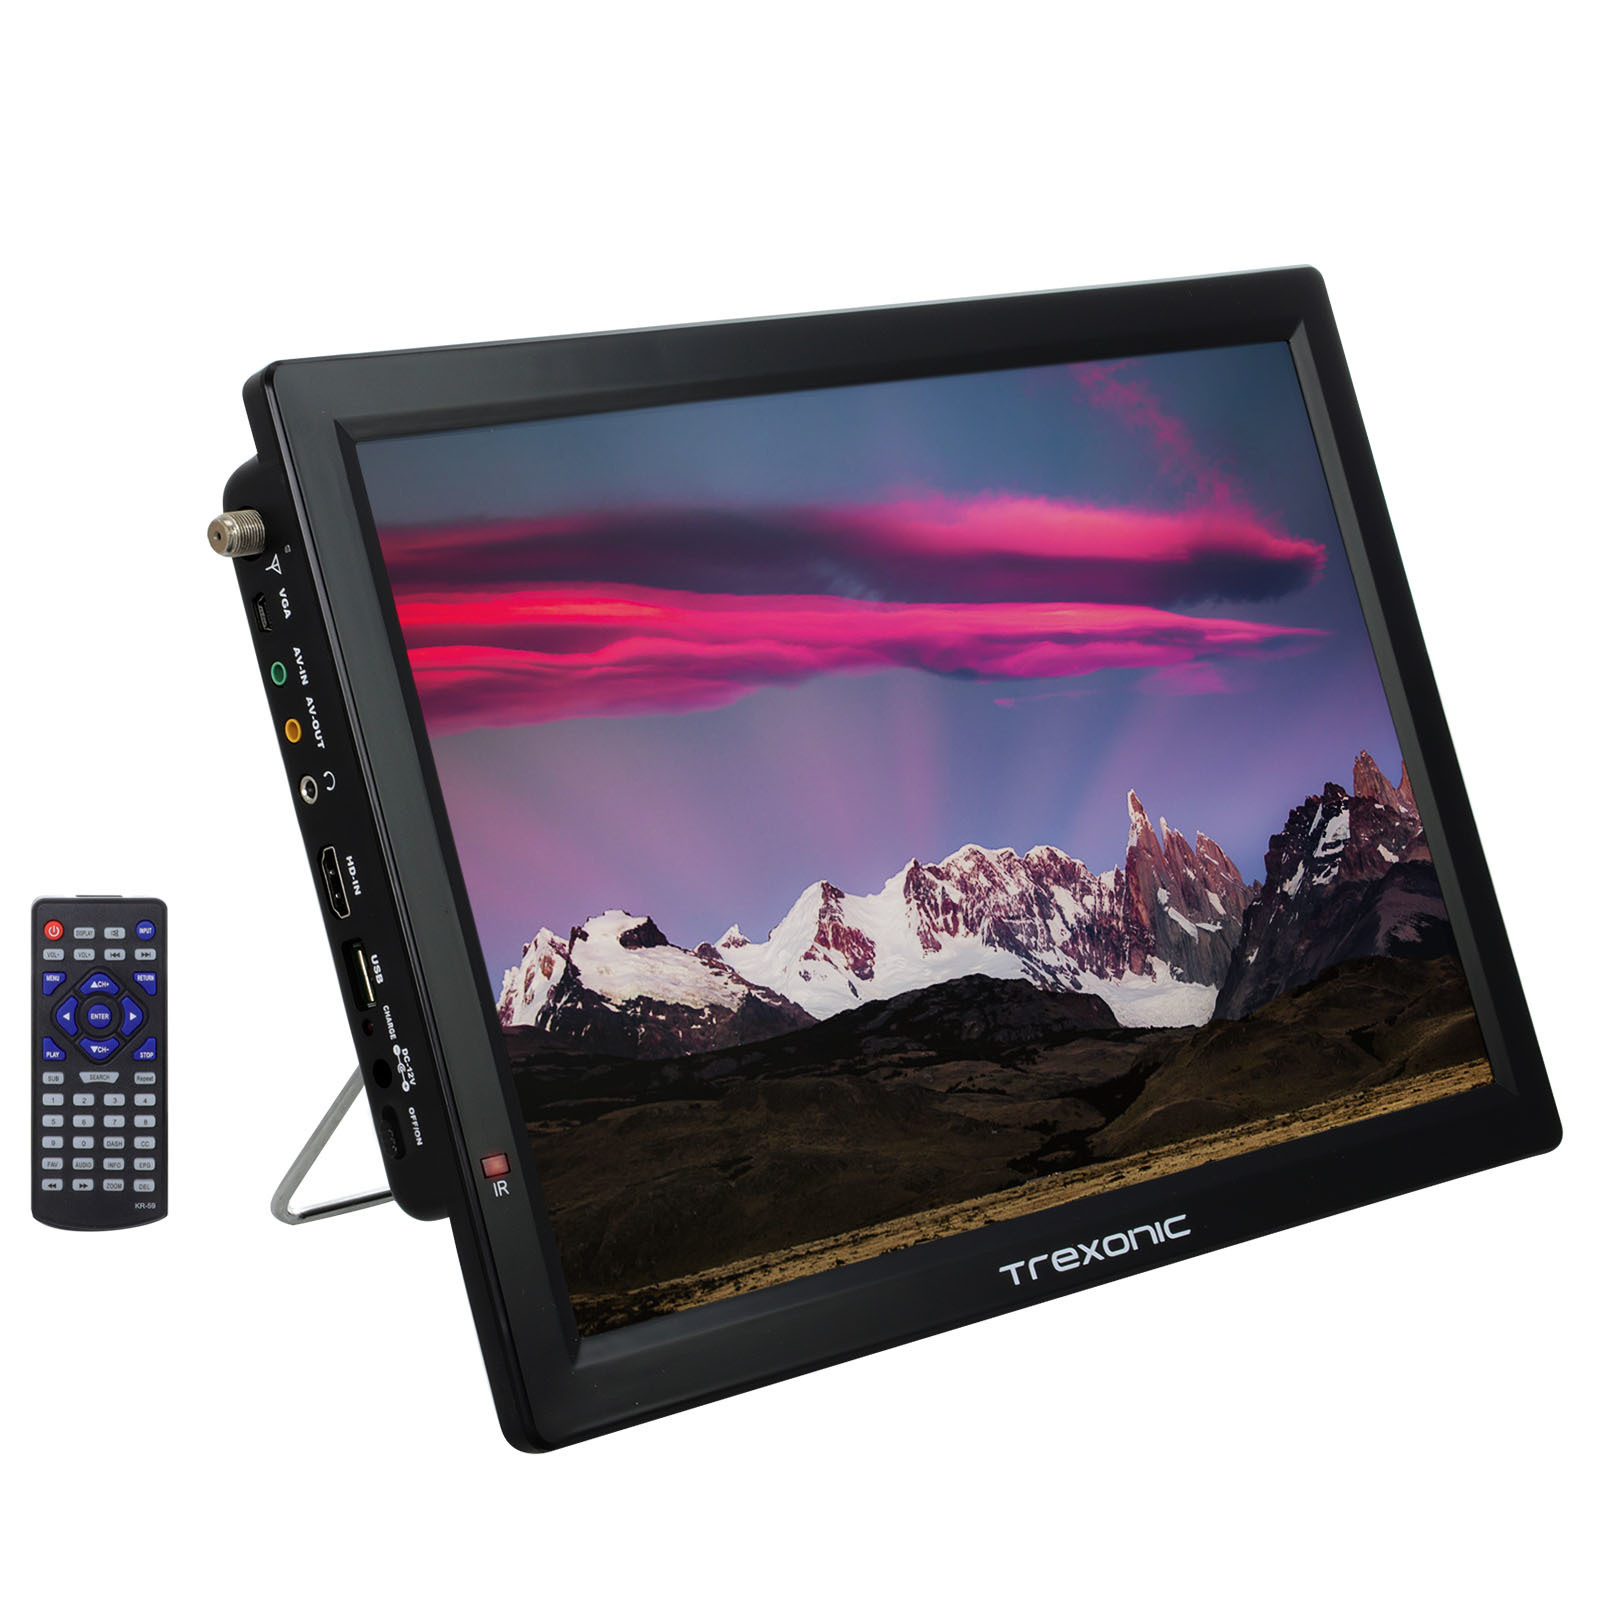 Trexonic Portable Rechargeable 14 Inch LED TV with HDMI, SD/MMC, USB